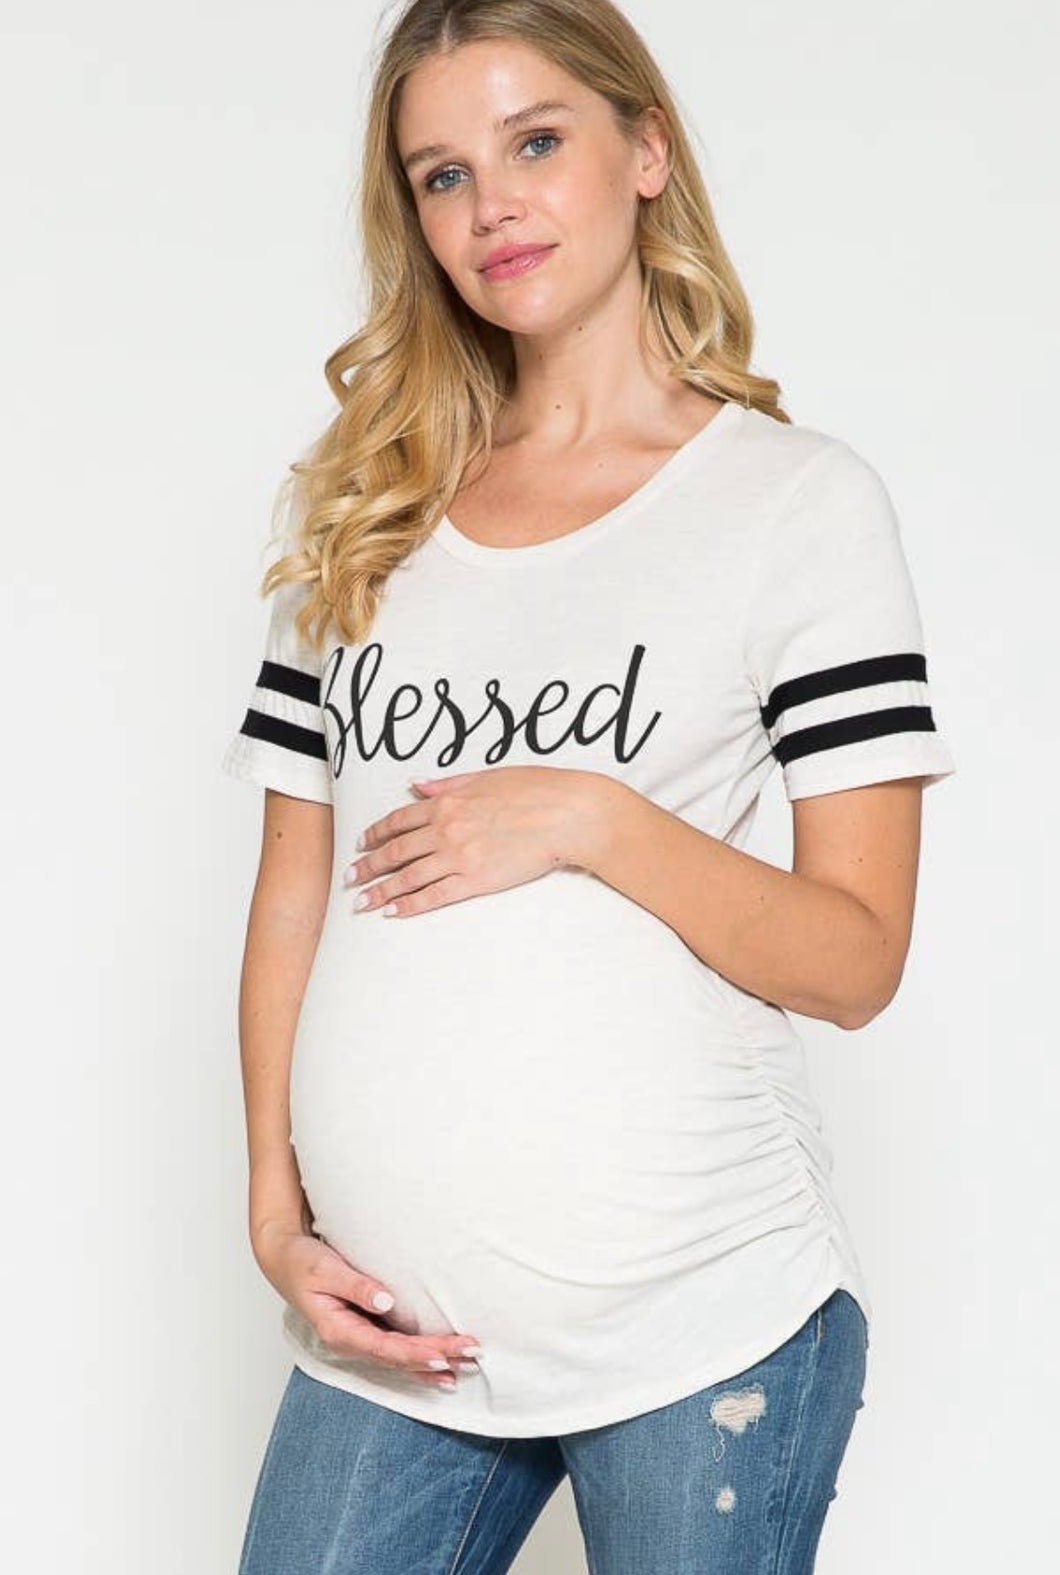 Blessed Maternity Top